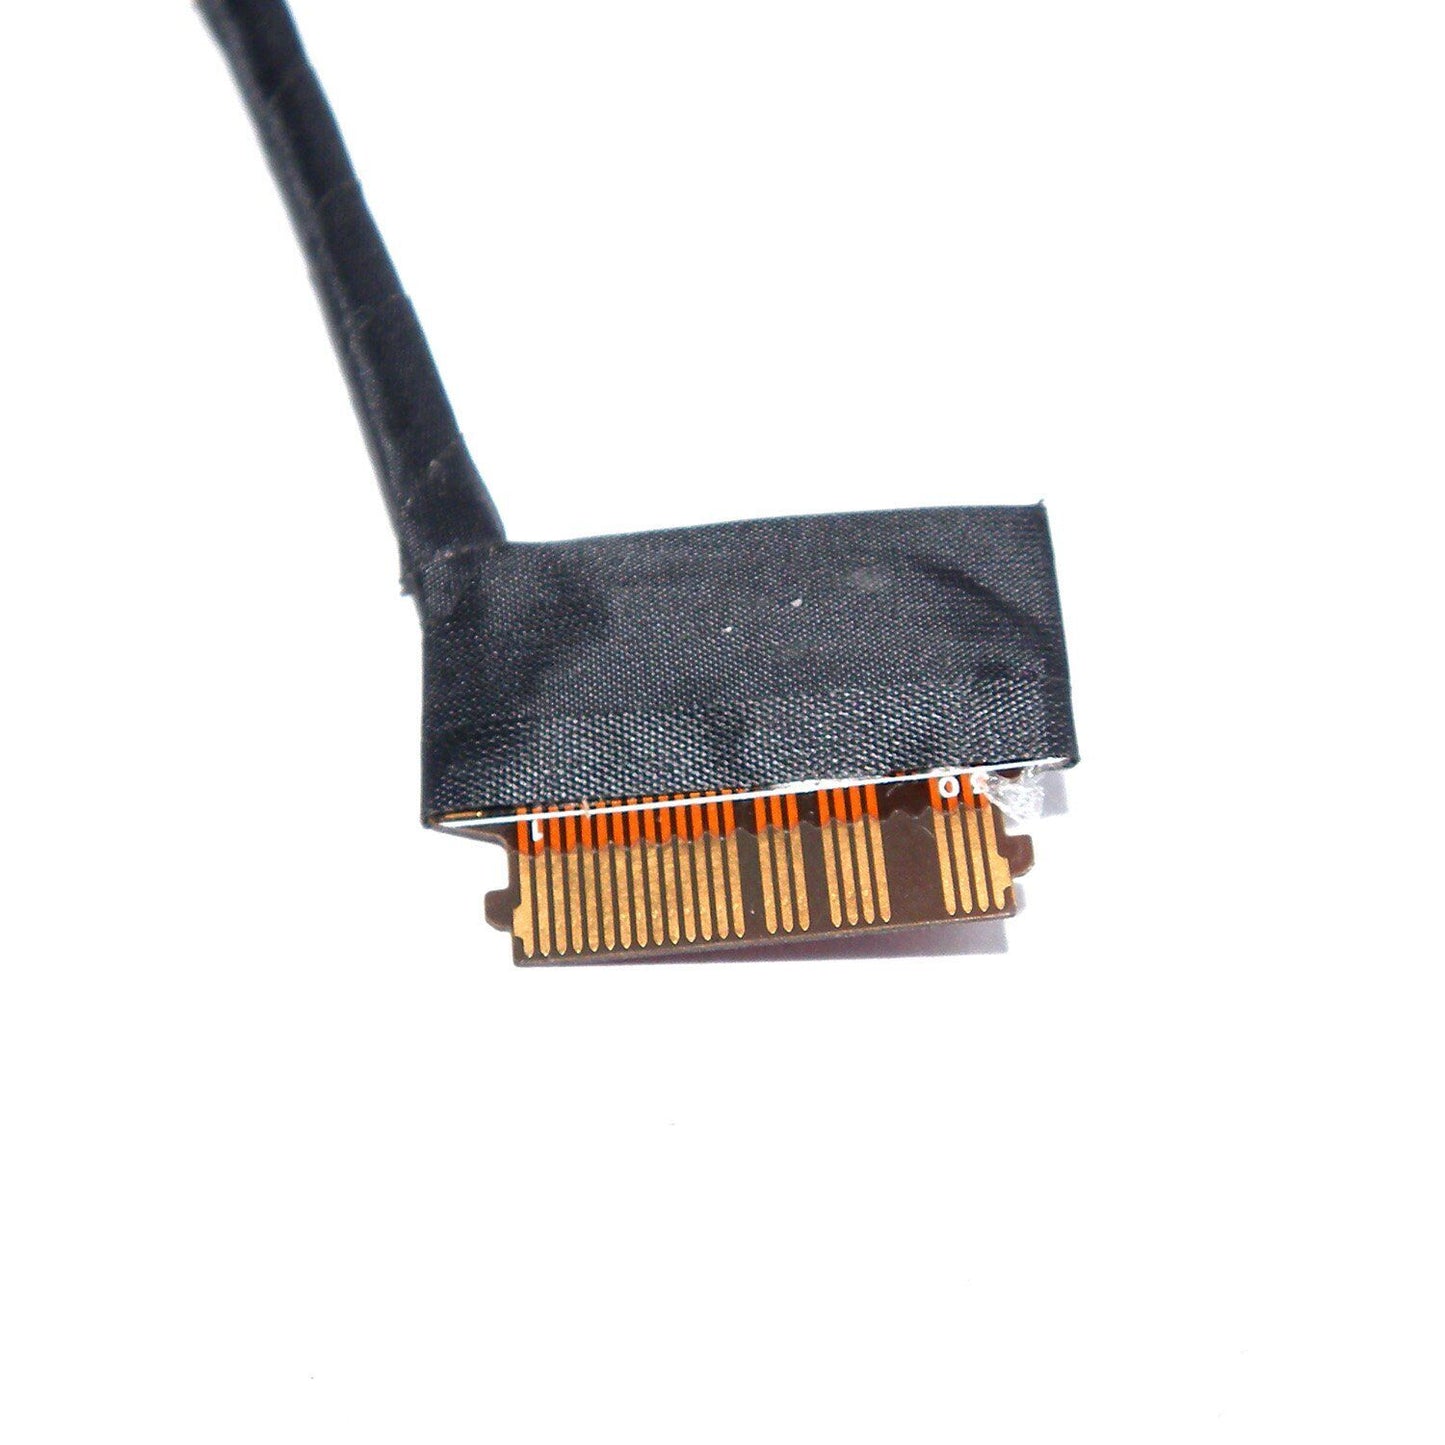 Toshiba New LCD LED LVDS Display Video Screen Cable Chromebook 2 CB35-C CB35-C3300 DD0BUILC010 DD0BUILC000